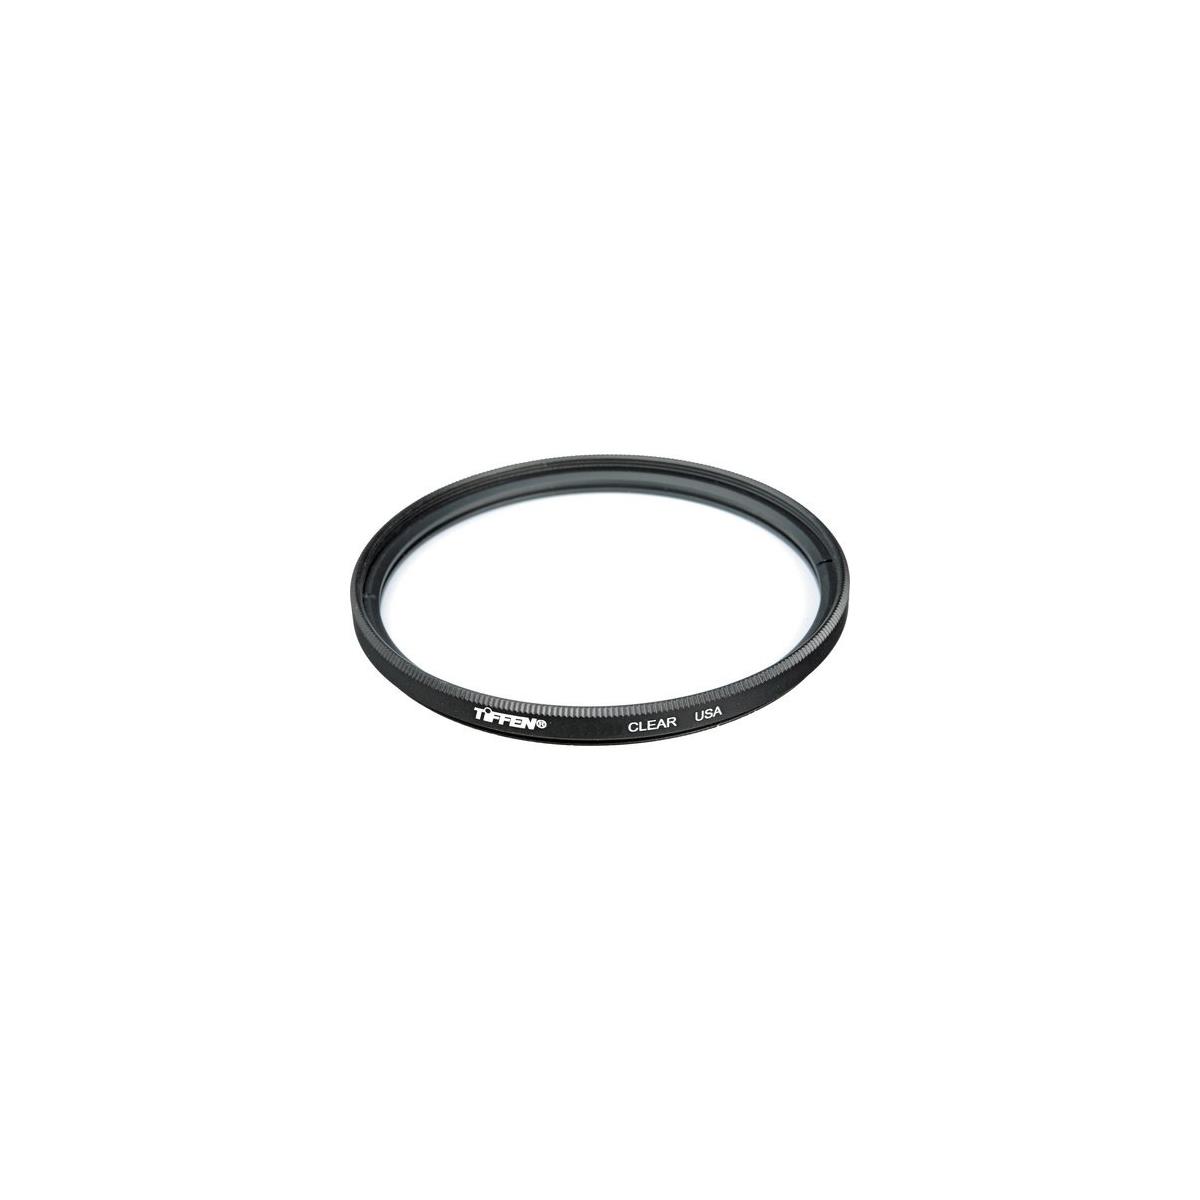 Tiffen 67mm Clear Protection Glass Filter